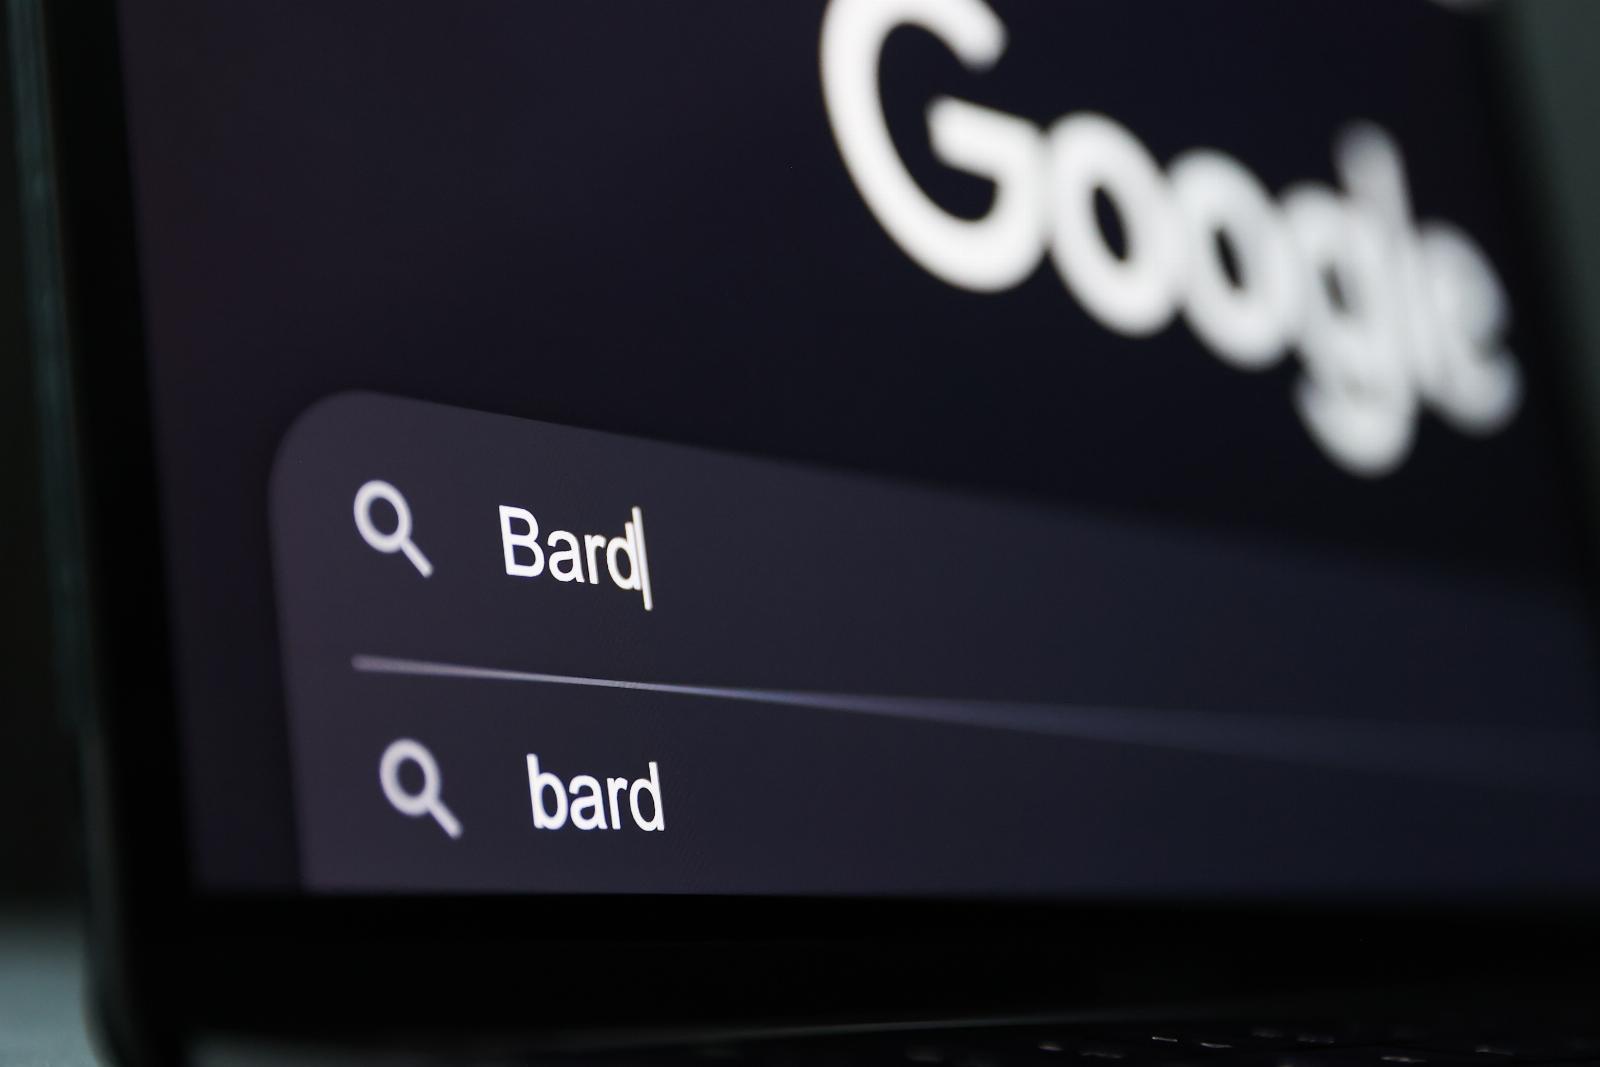 Google claims that Bard is improving at math and programming